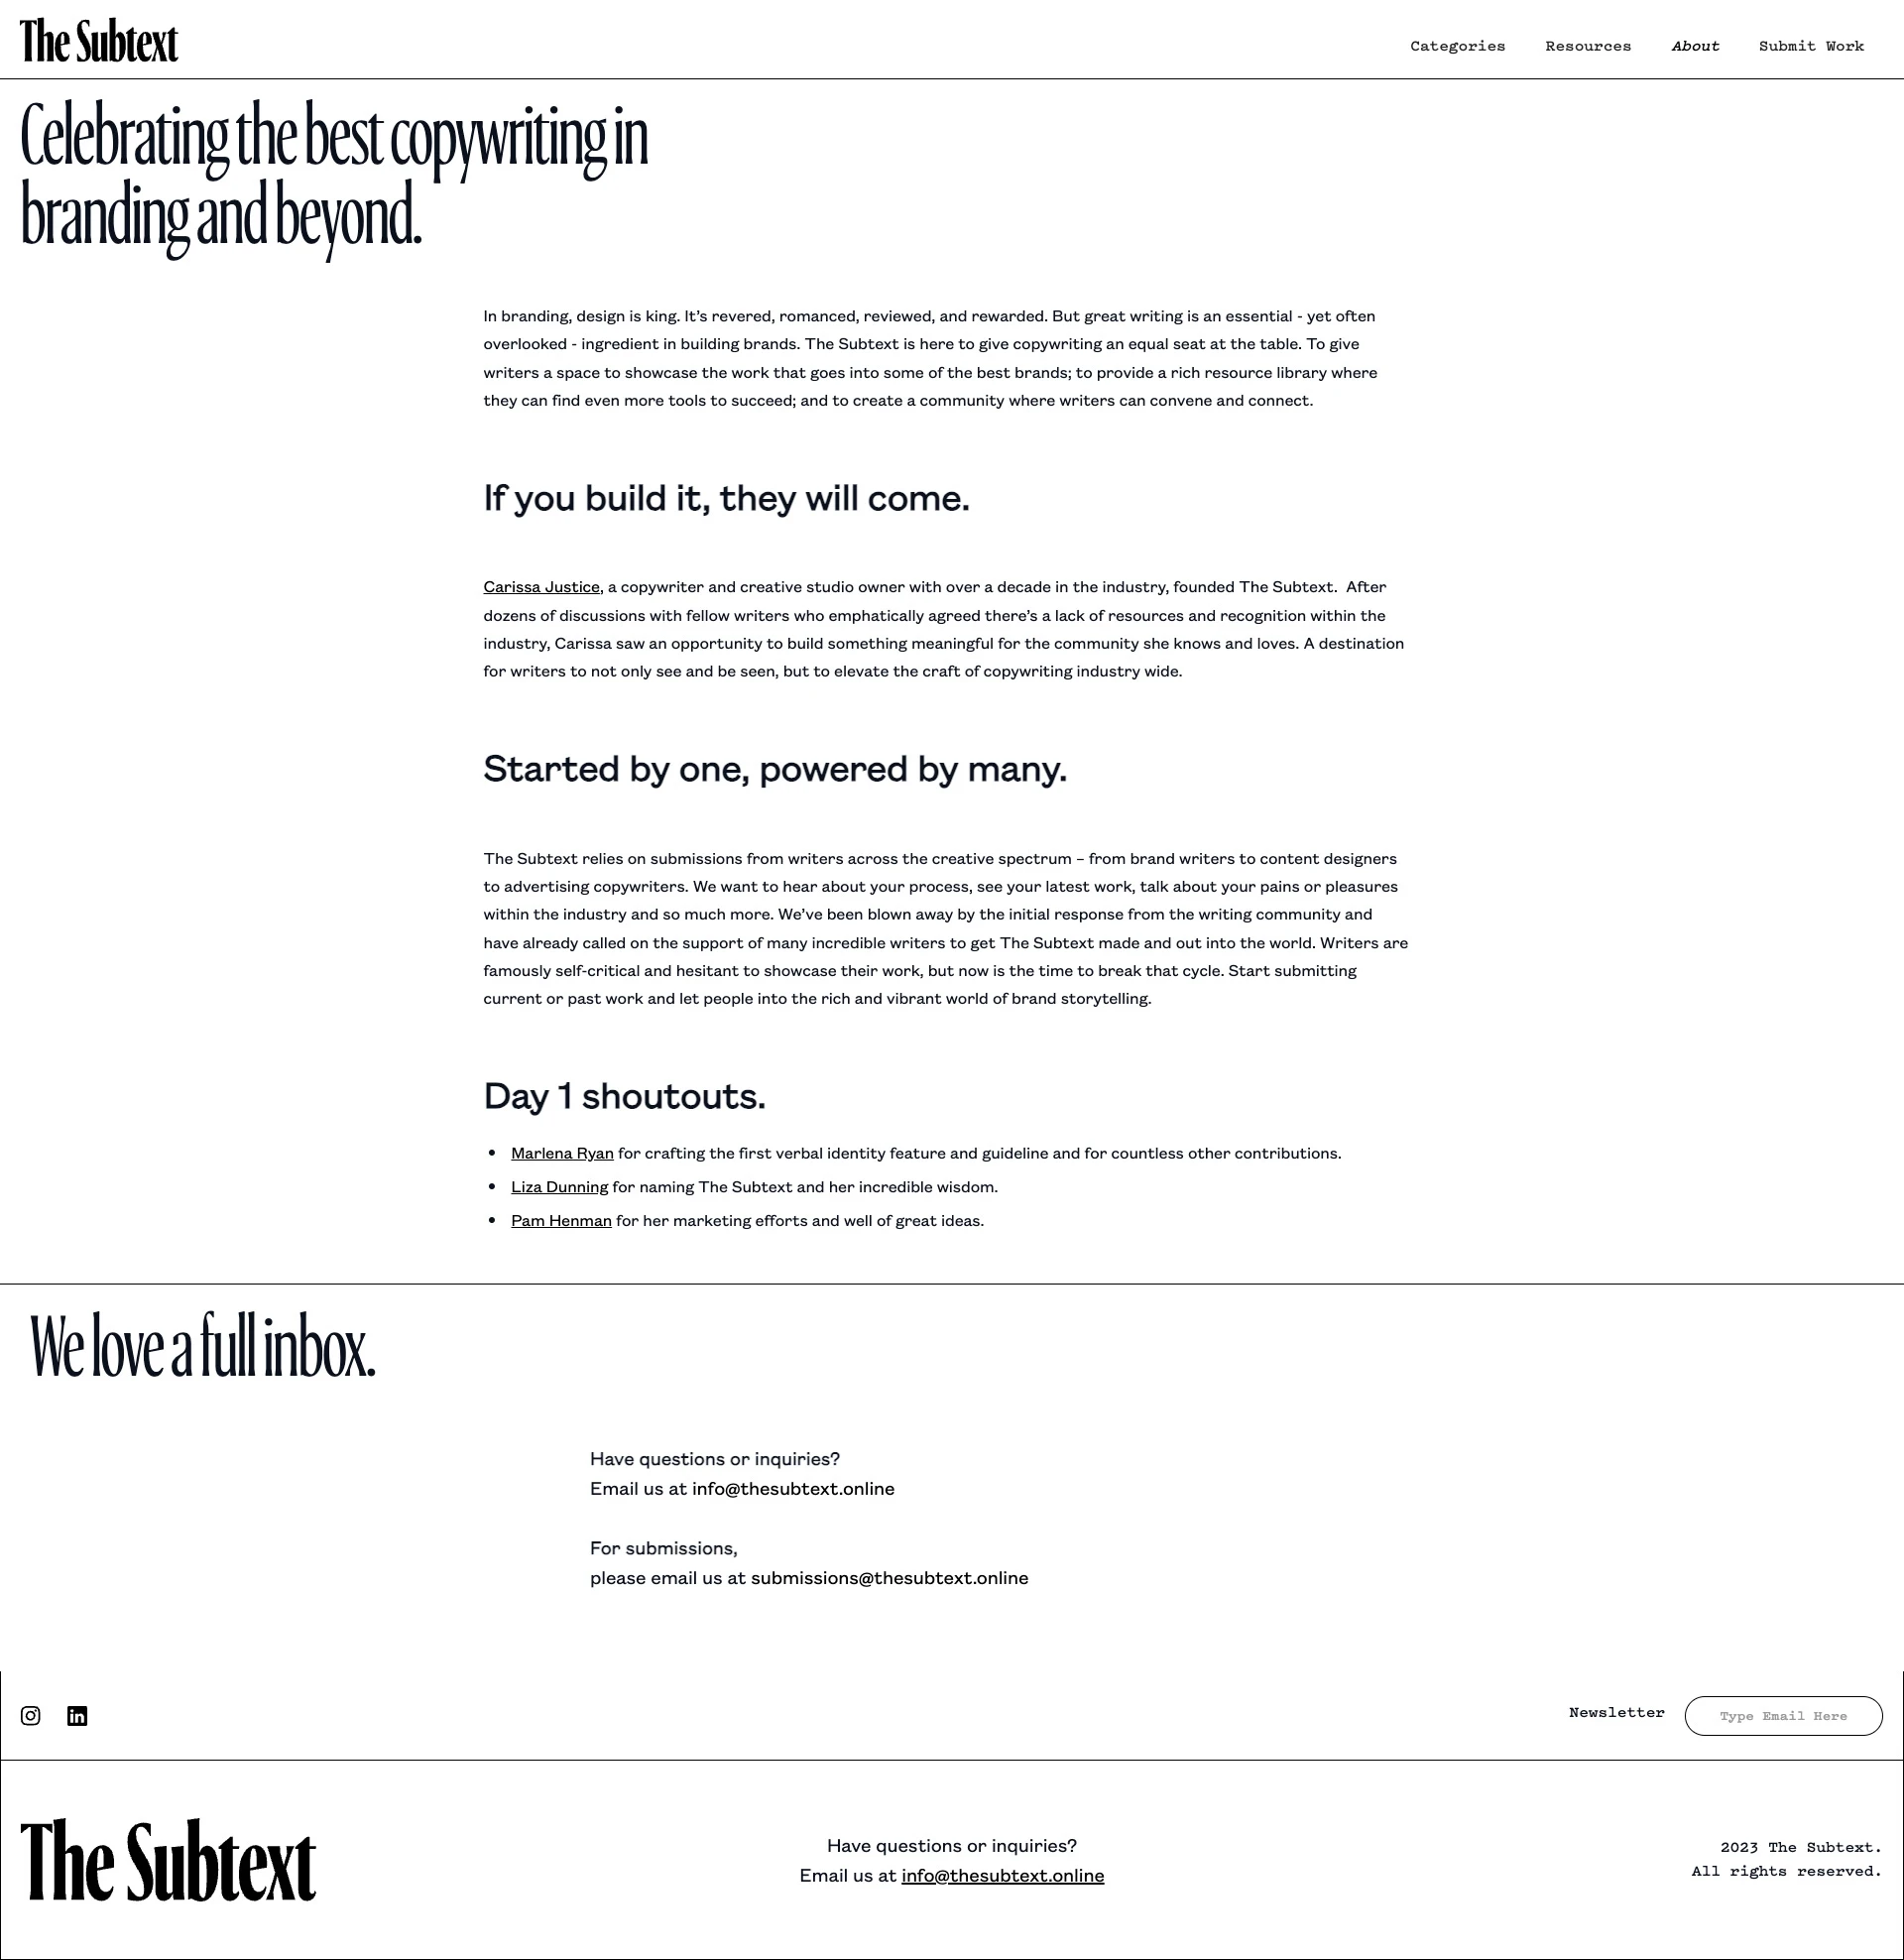 The Subtext Landing Page Example: Discover a treasure trove of copywriting resources, engaging articles, and showcase your work with The Subtext. A Platform where copywriting brilliance is celebrated and shared.